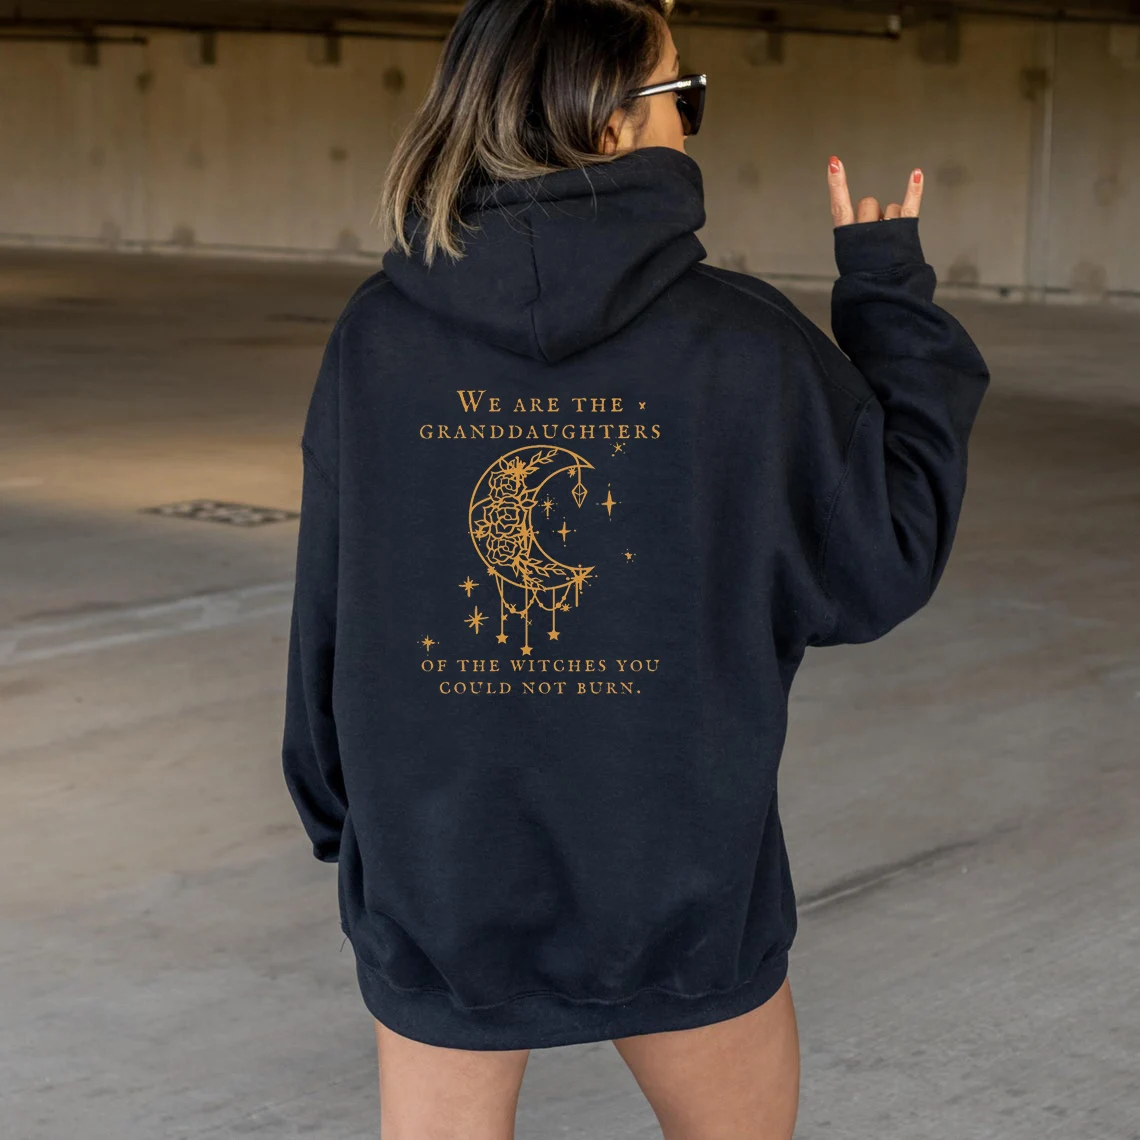 We Are the Granddaughters of the Witches You Could Not Burn Salem Witch Feminist Mystical hoodies women unisex cotton pullovers